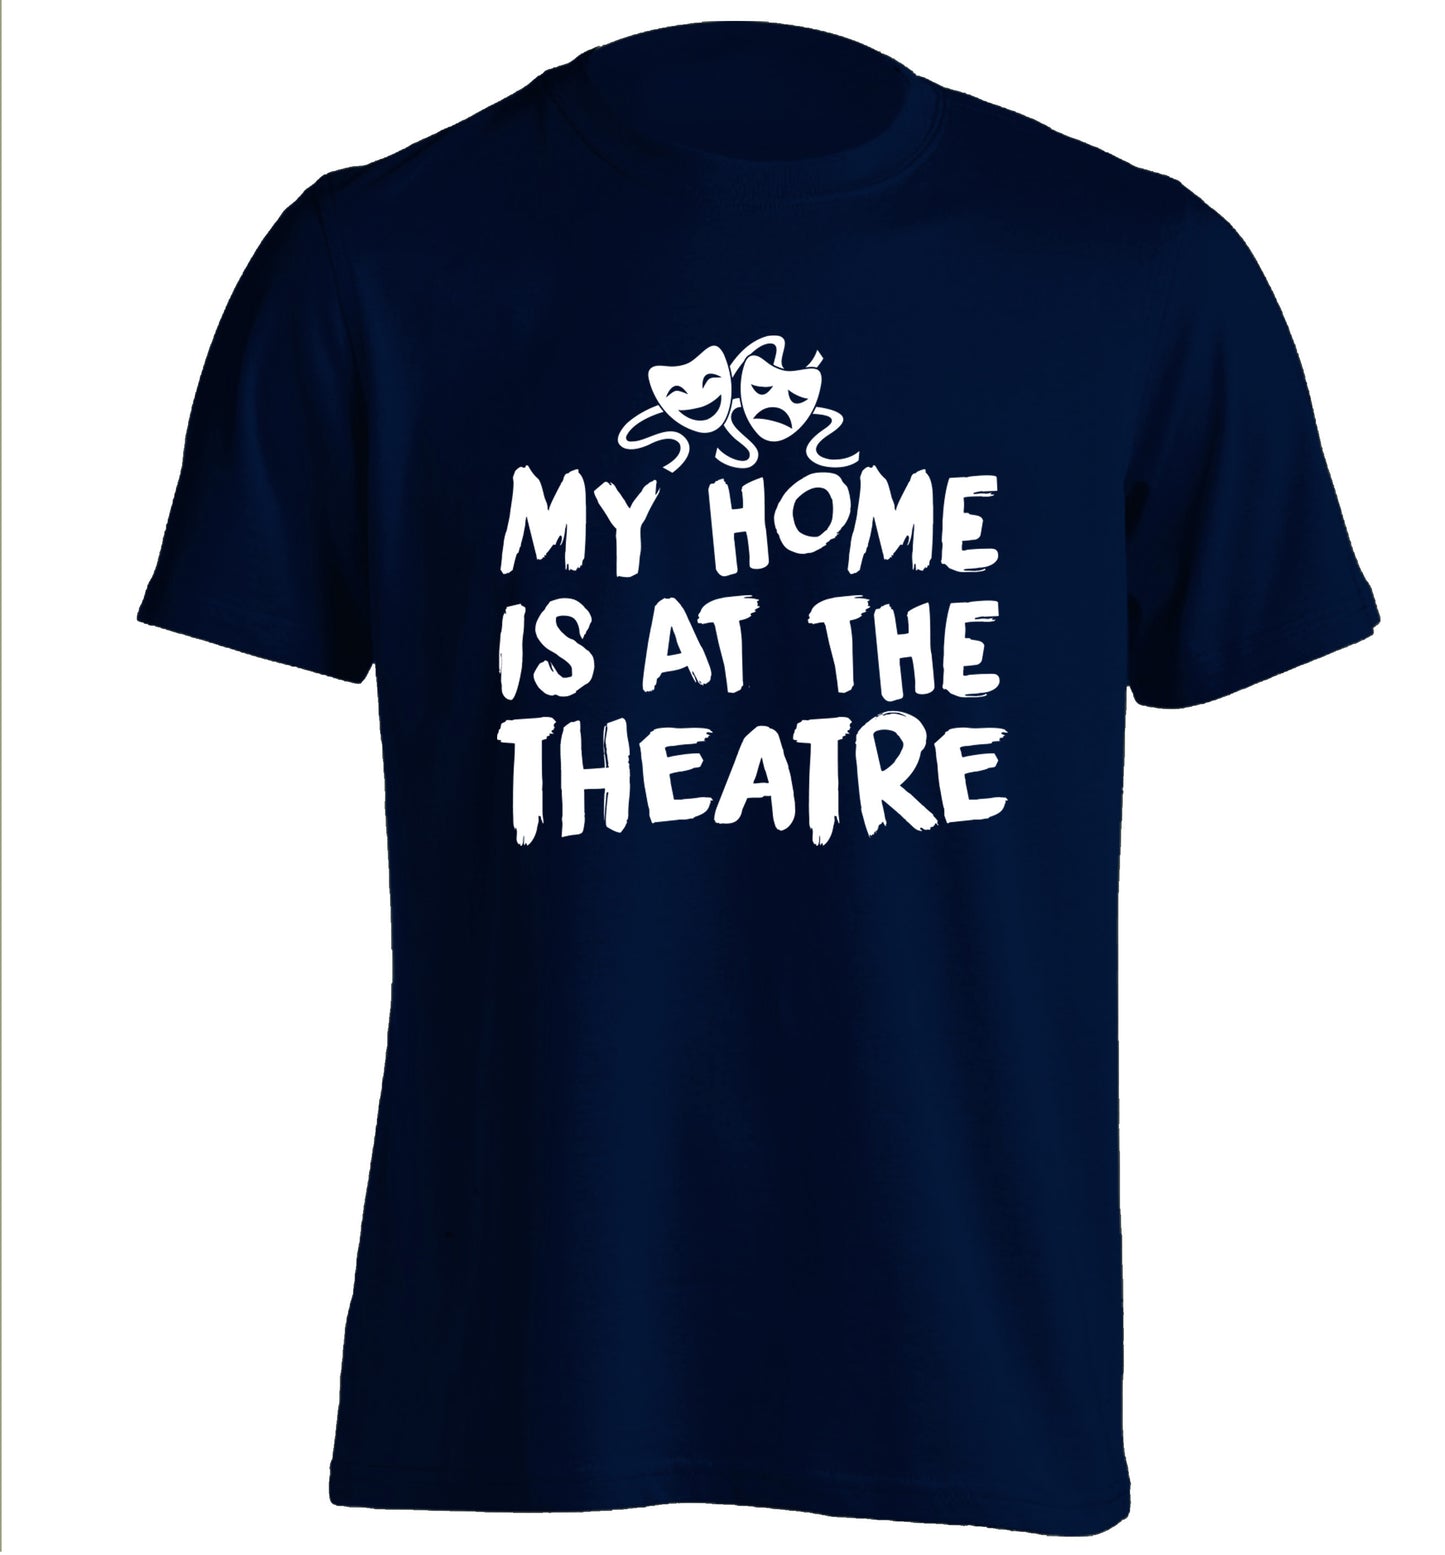 My home is at the theatre adults unisex navy Tshirt 2XL